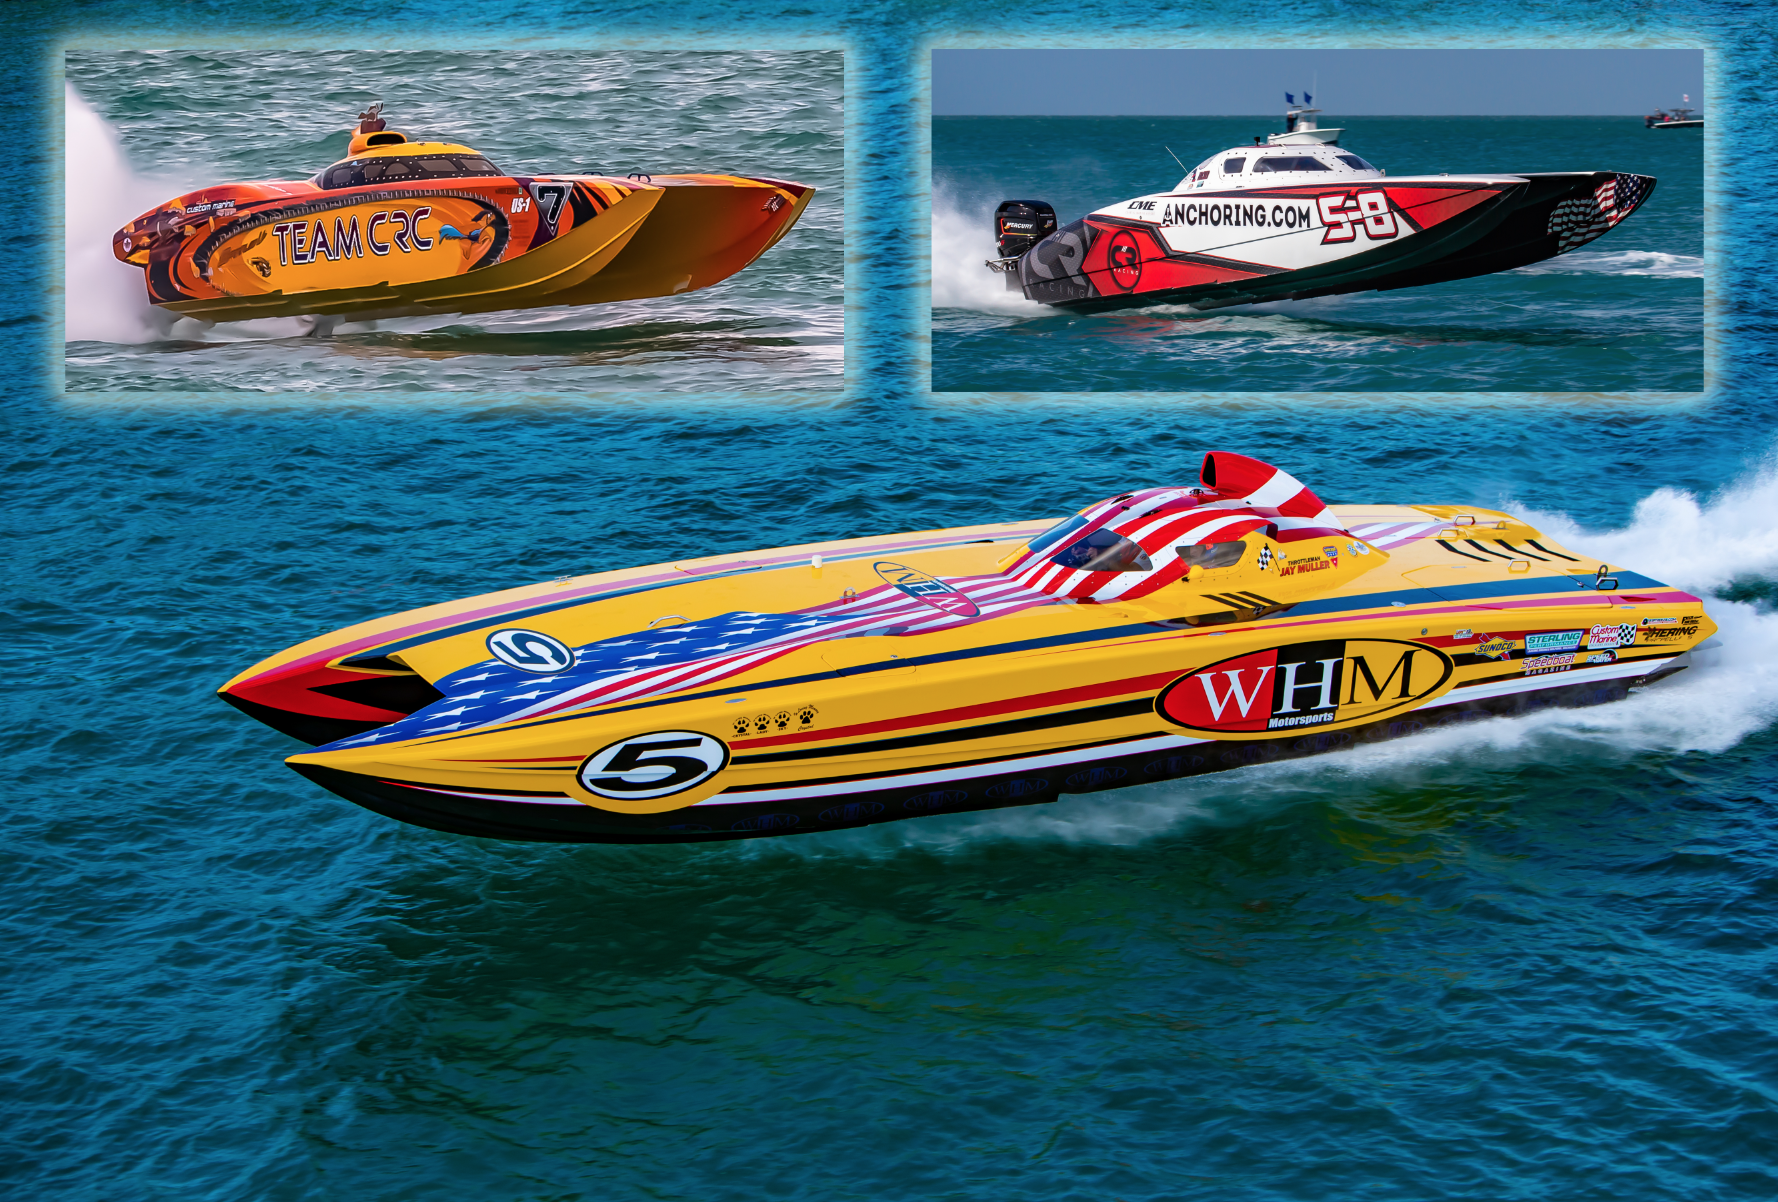 WHM, Team CRC, CR Racing Win in First Day of Key West ...